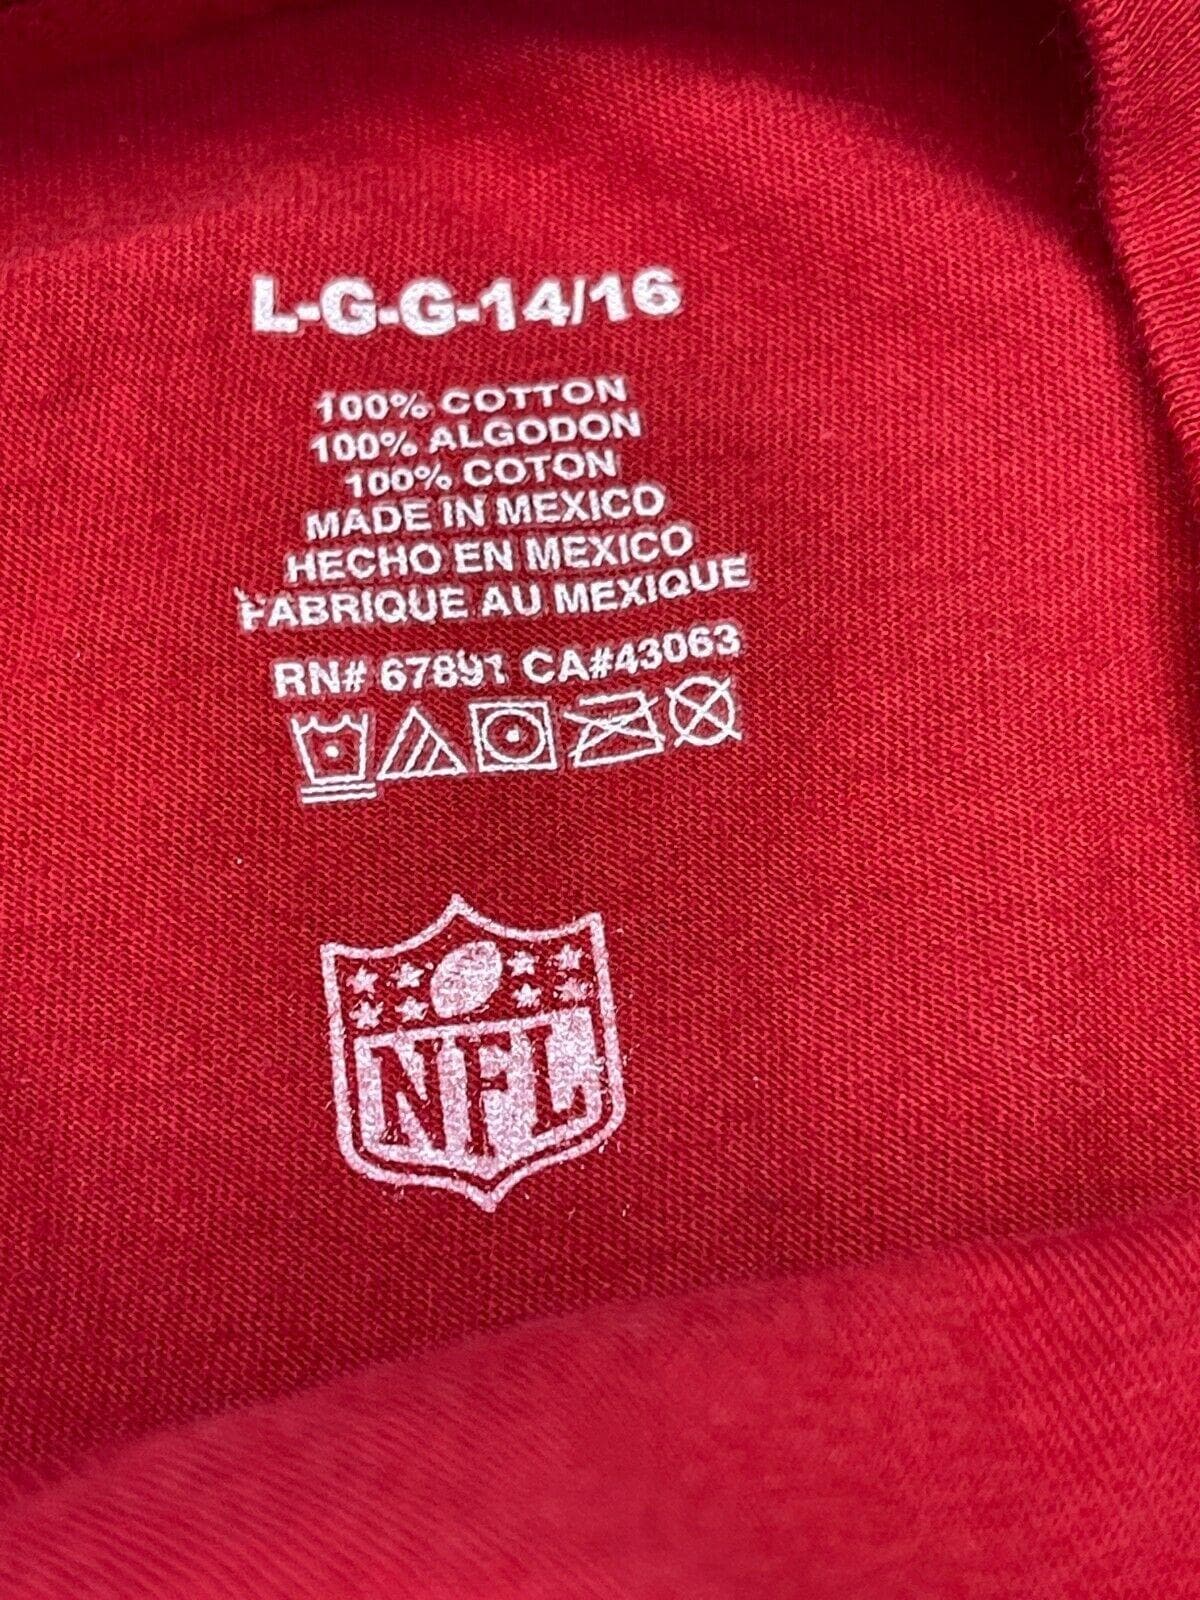 NFL Tampa Bay Buccaneers Tom Brady #12 T-Shirt Youth Large 14-16